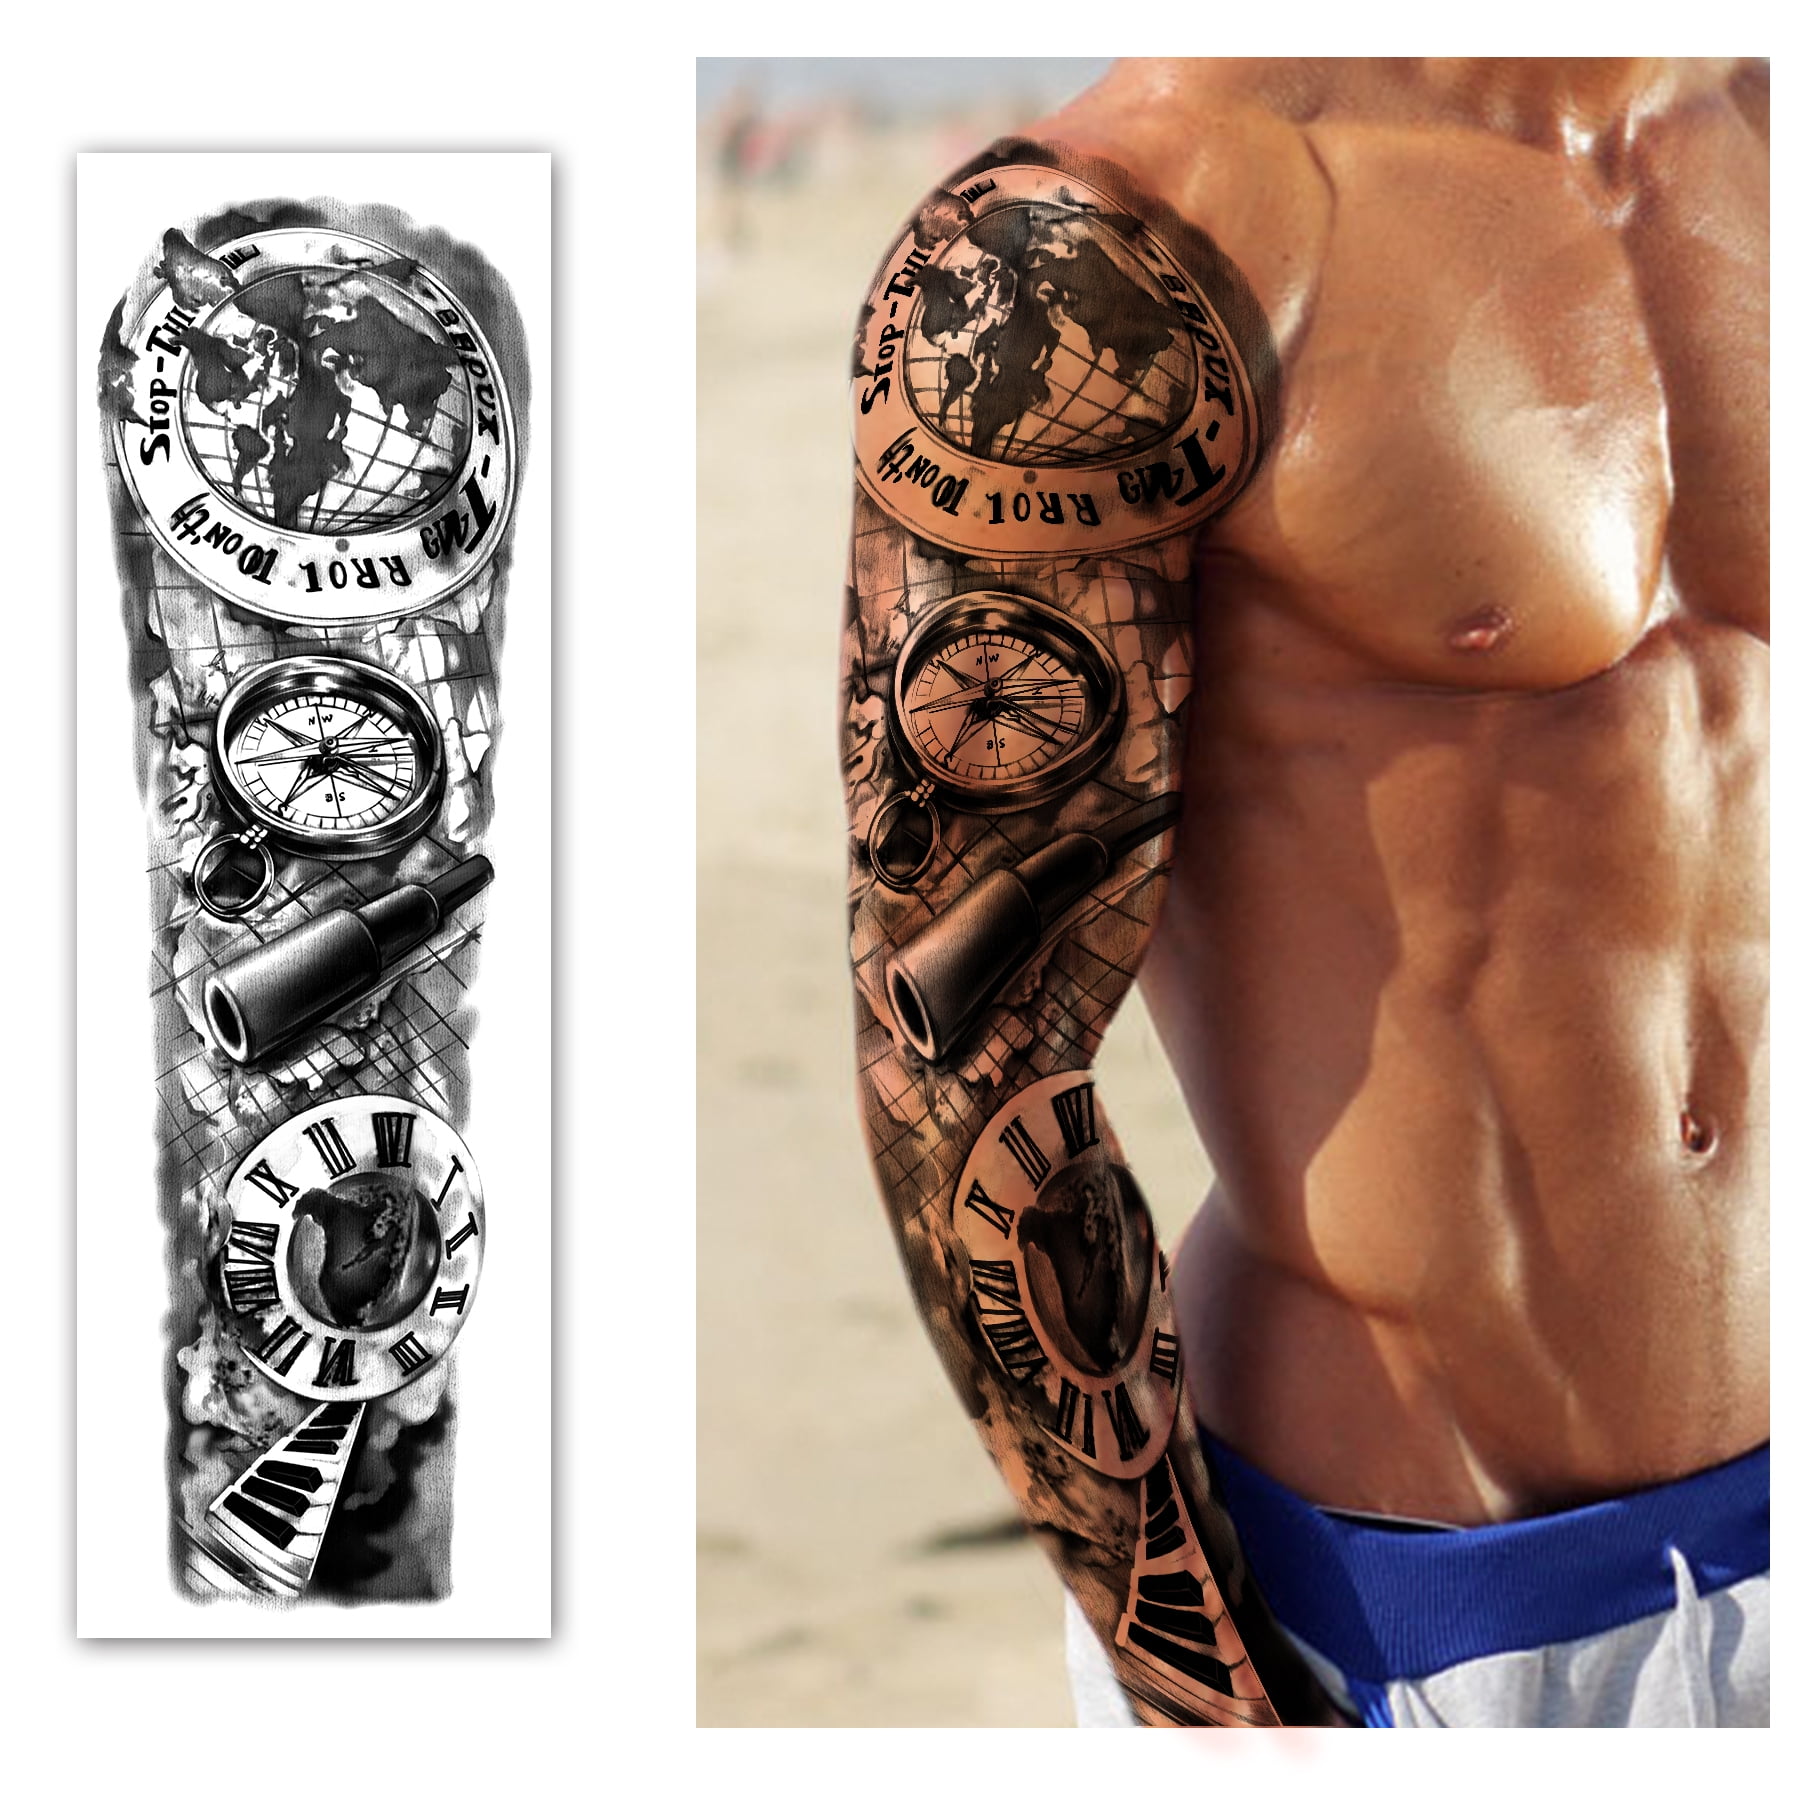 Waterproof Full Arm Temporary Tattoos 8 Sheets and Half Arm Shoulder Tattoo 8 Sheets, Extra Large LastingTattoo Stickers for Men and Women (22.83"X7.1") - Walmart.com